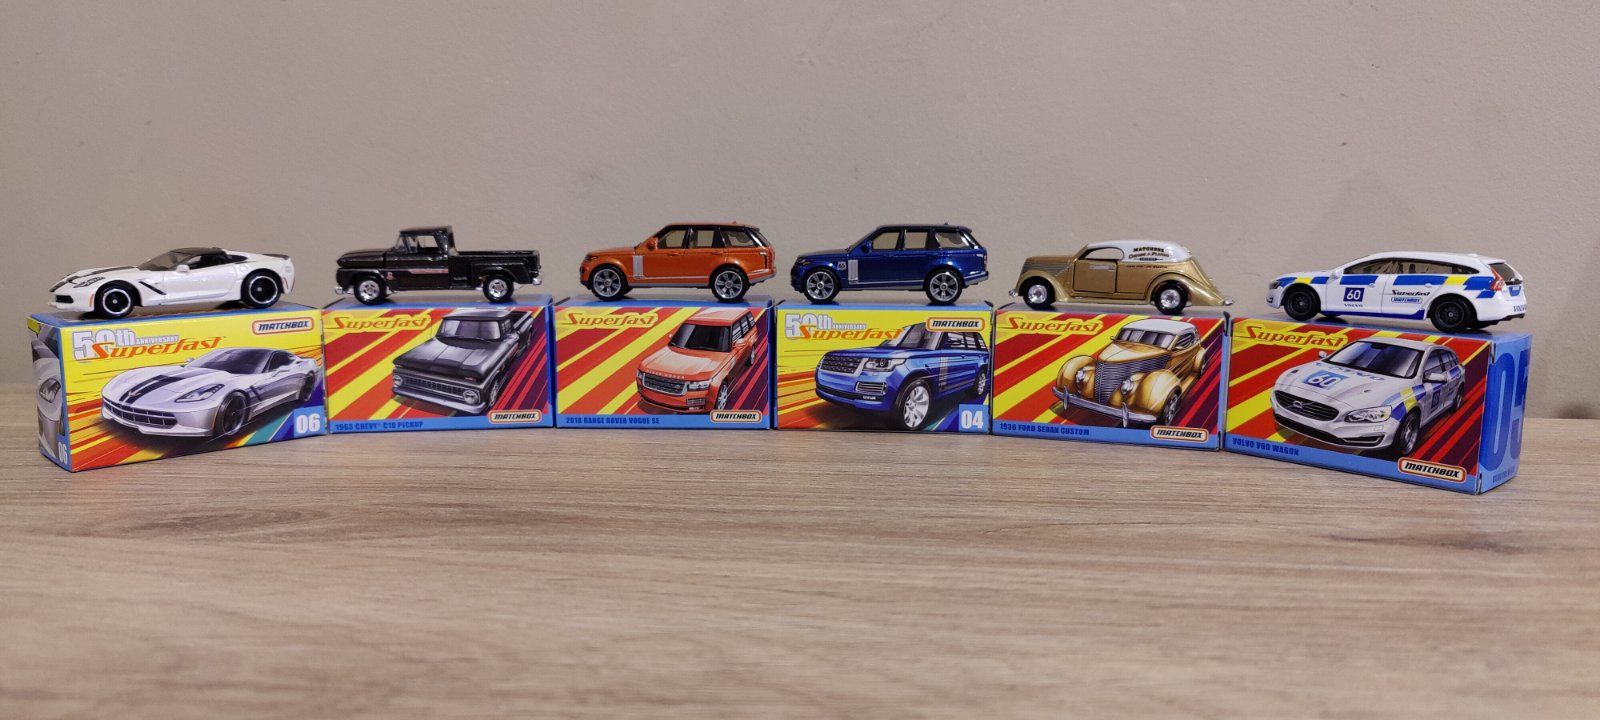 Matchbox SuperFast и  GreenLight Ford Motocraft - 4 chase models